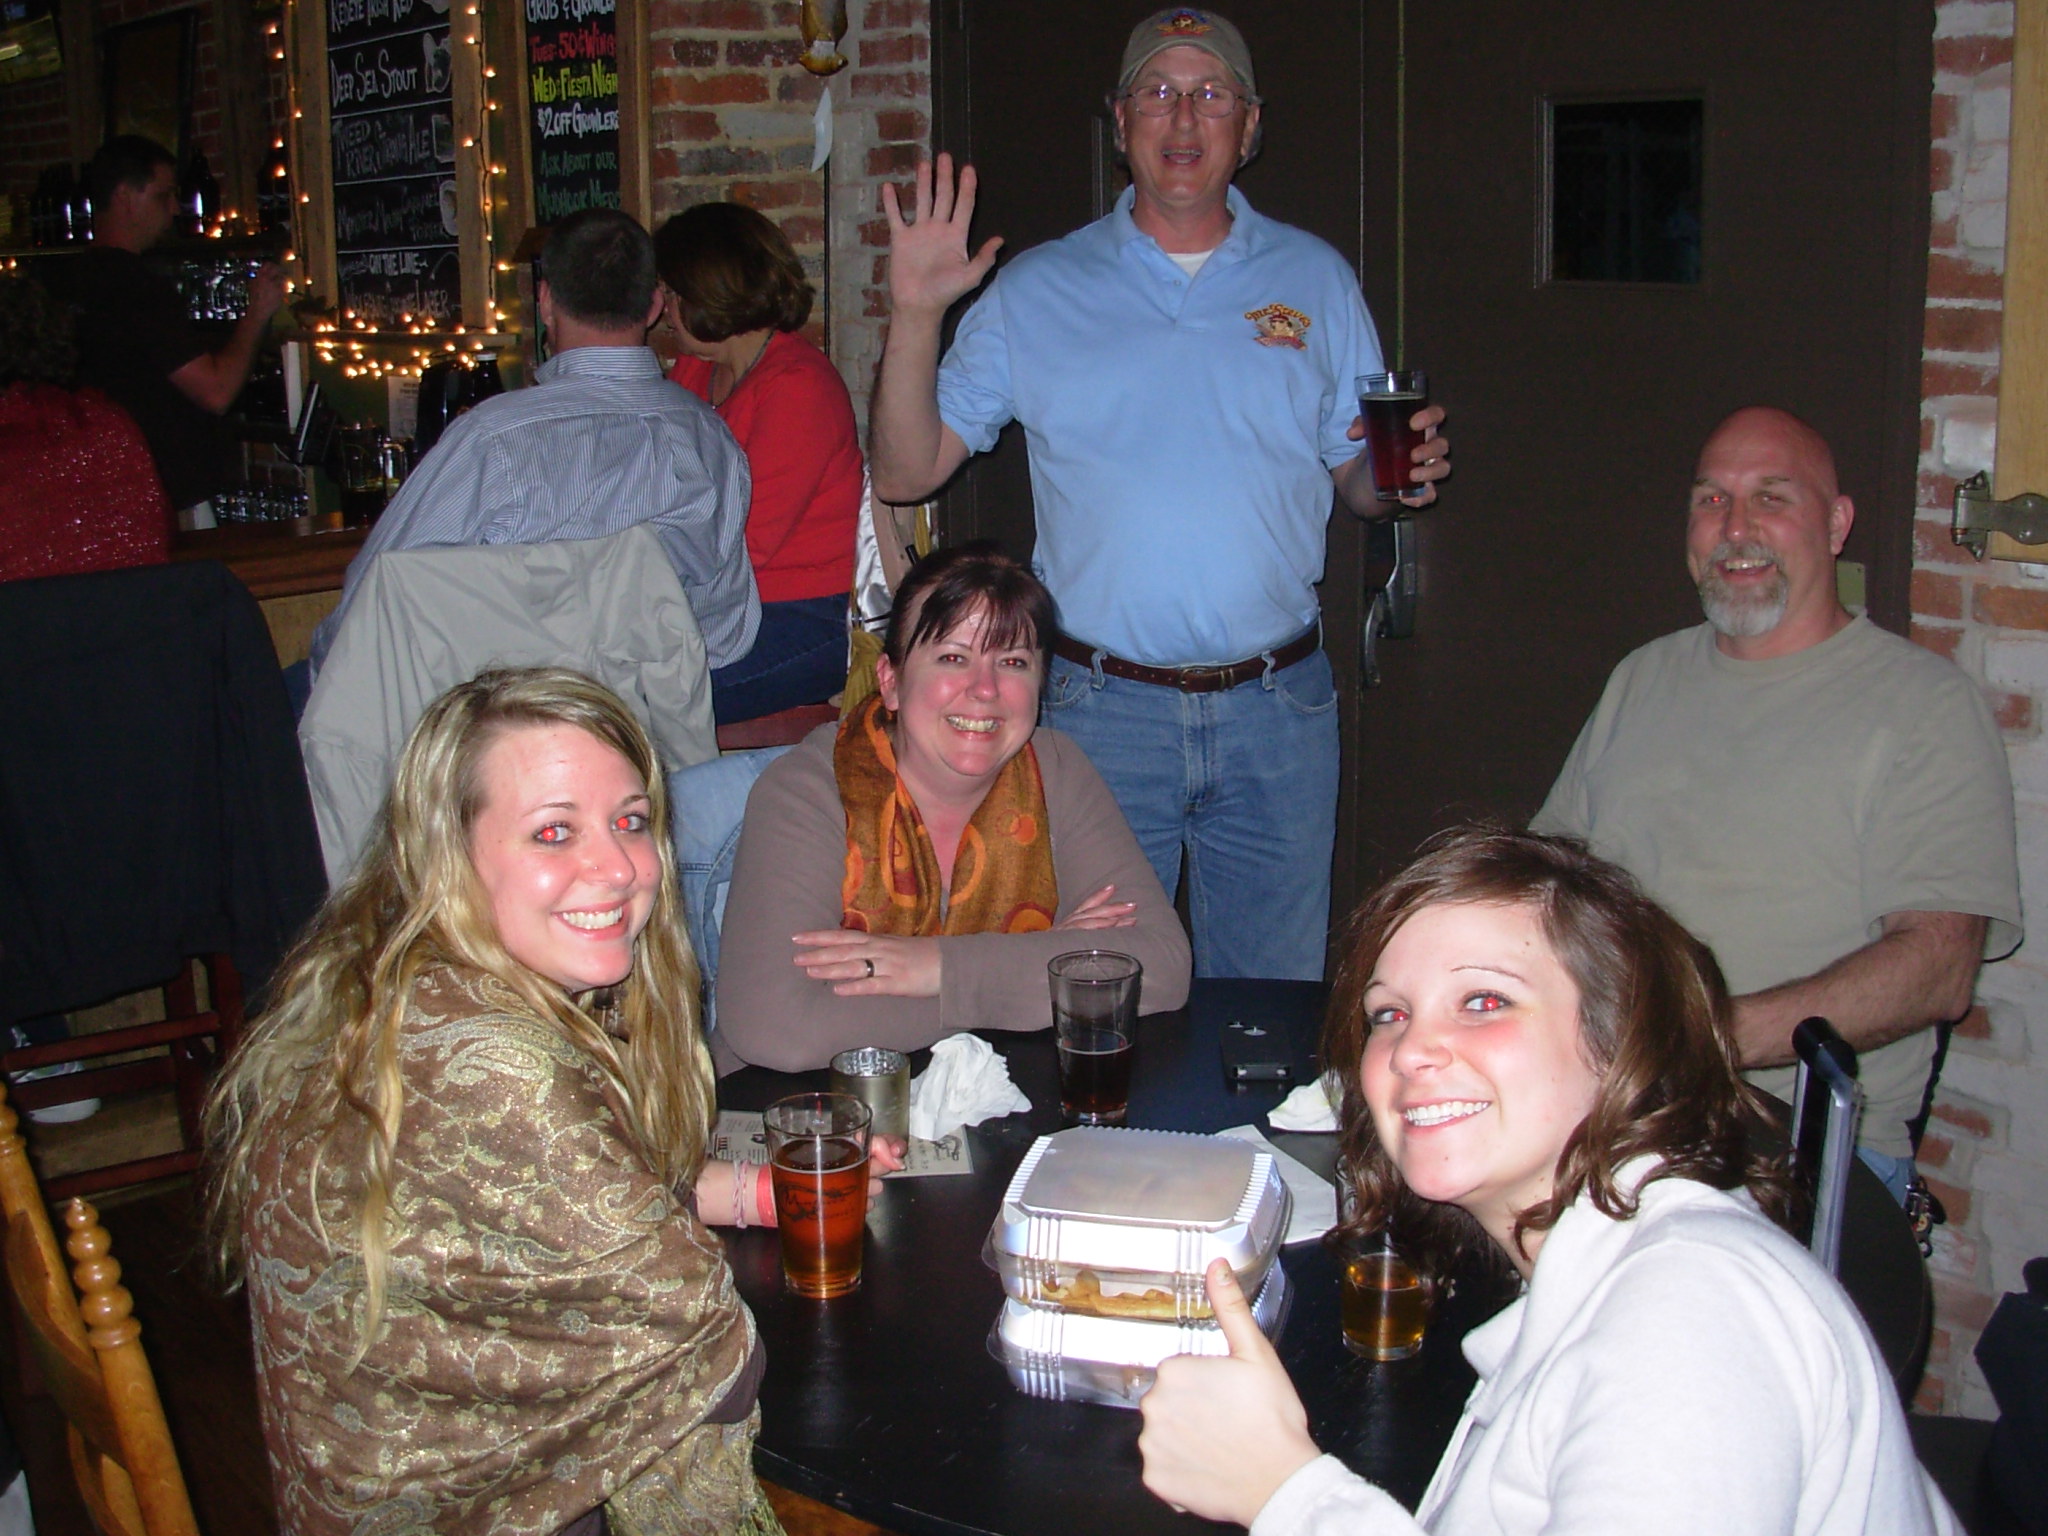 Well wishers at Mudhook Brewing in York
